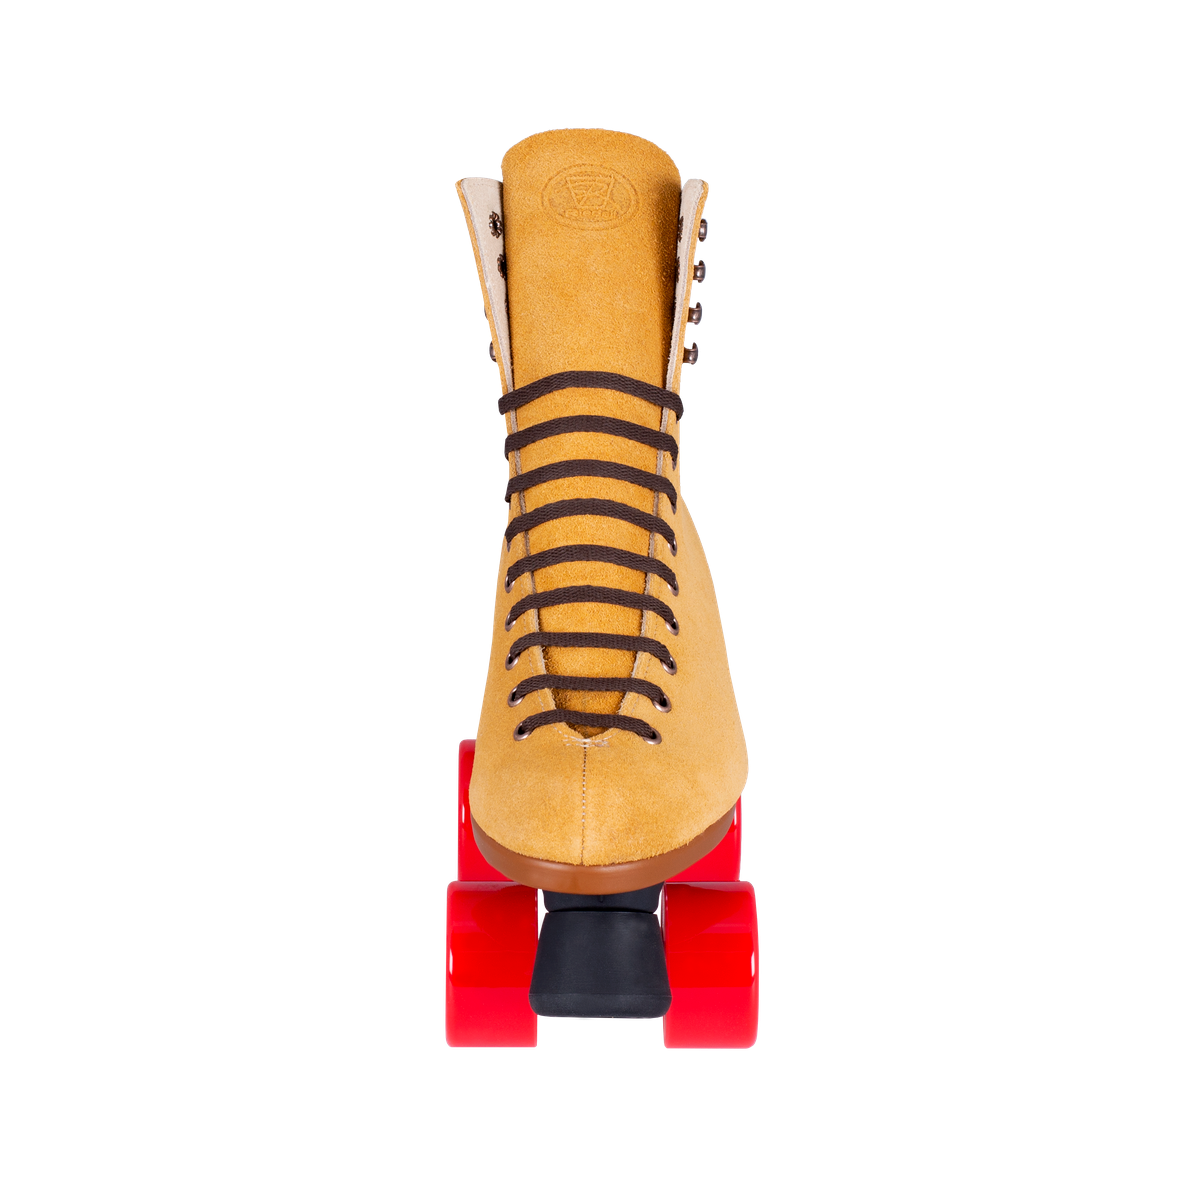 RIEDELL ZONE OUTDOOR ROLLER SKATE-TAN